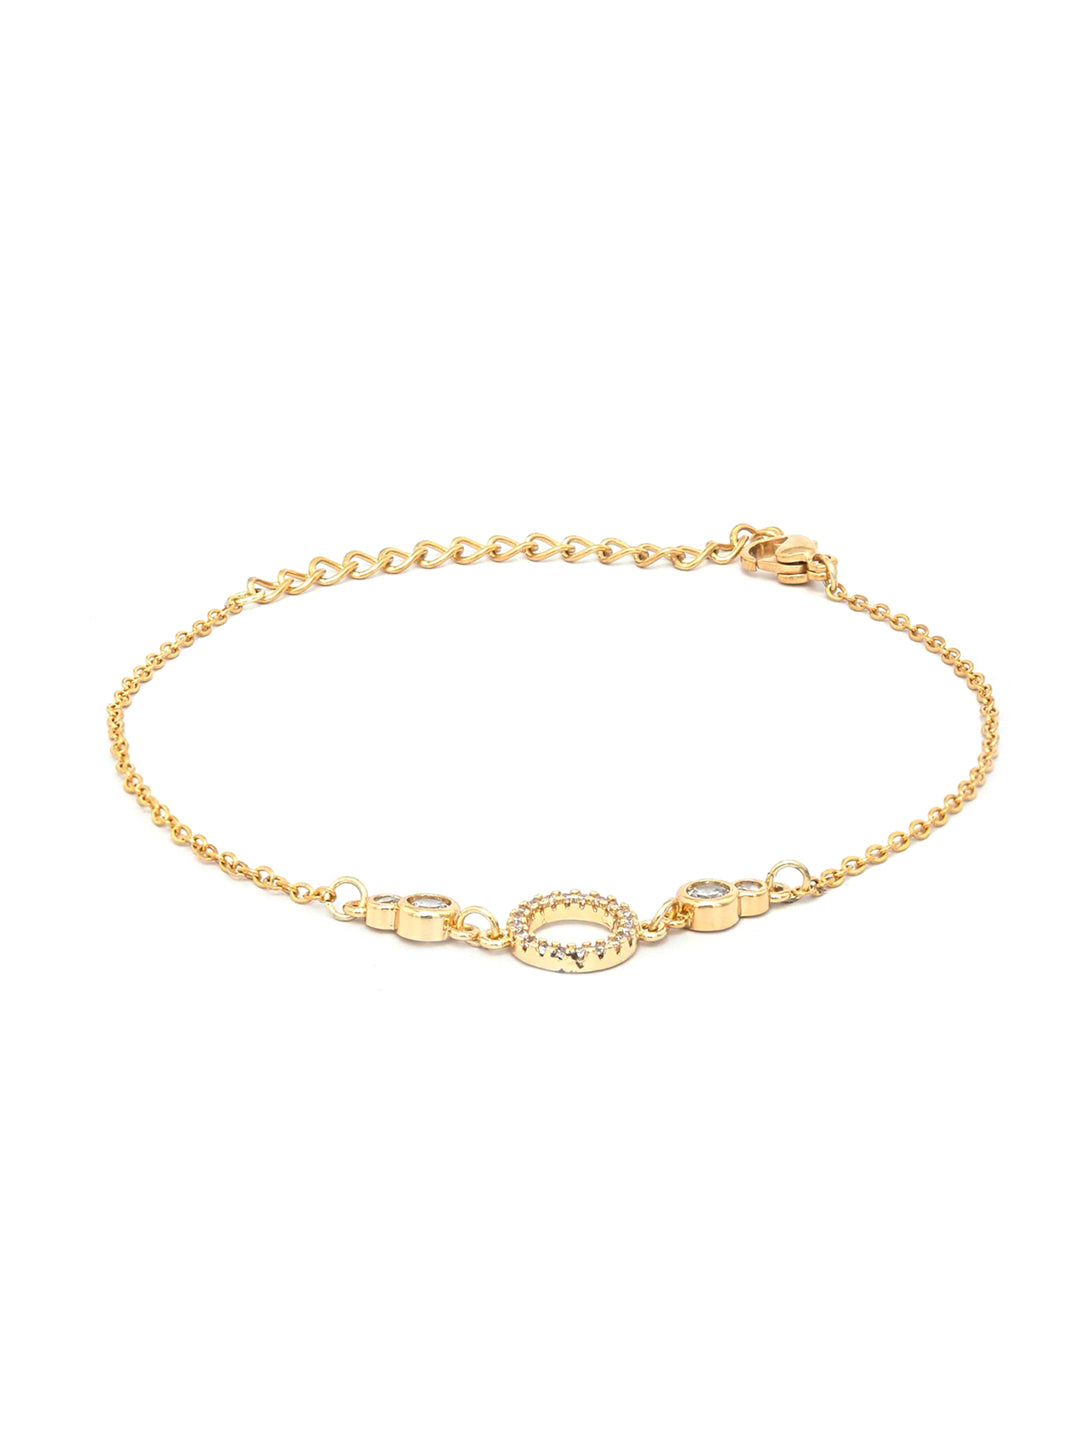 American Diamond Gold Plated Link Bracelet In Circle